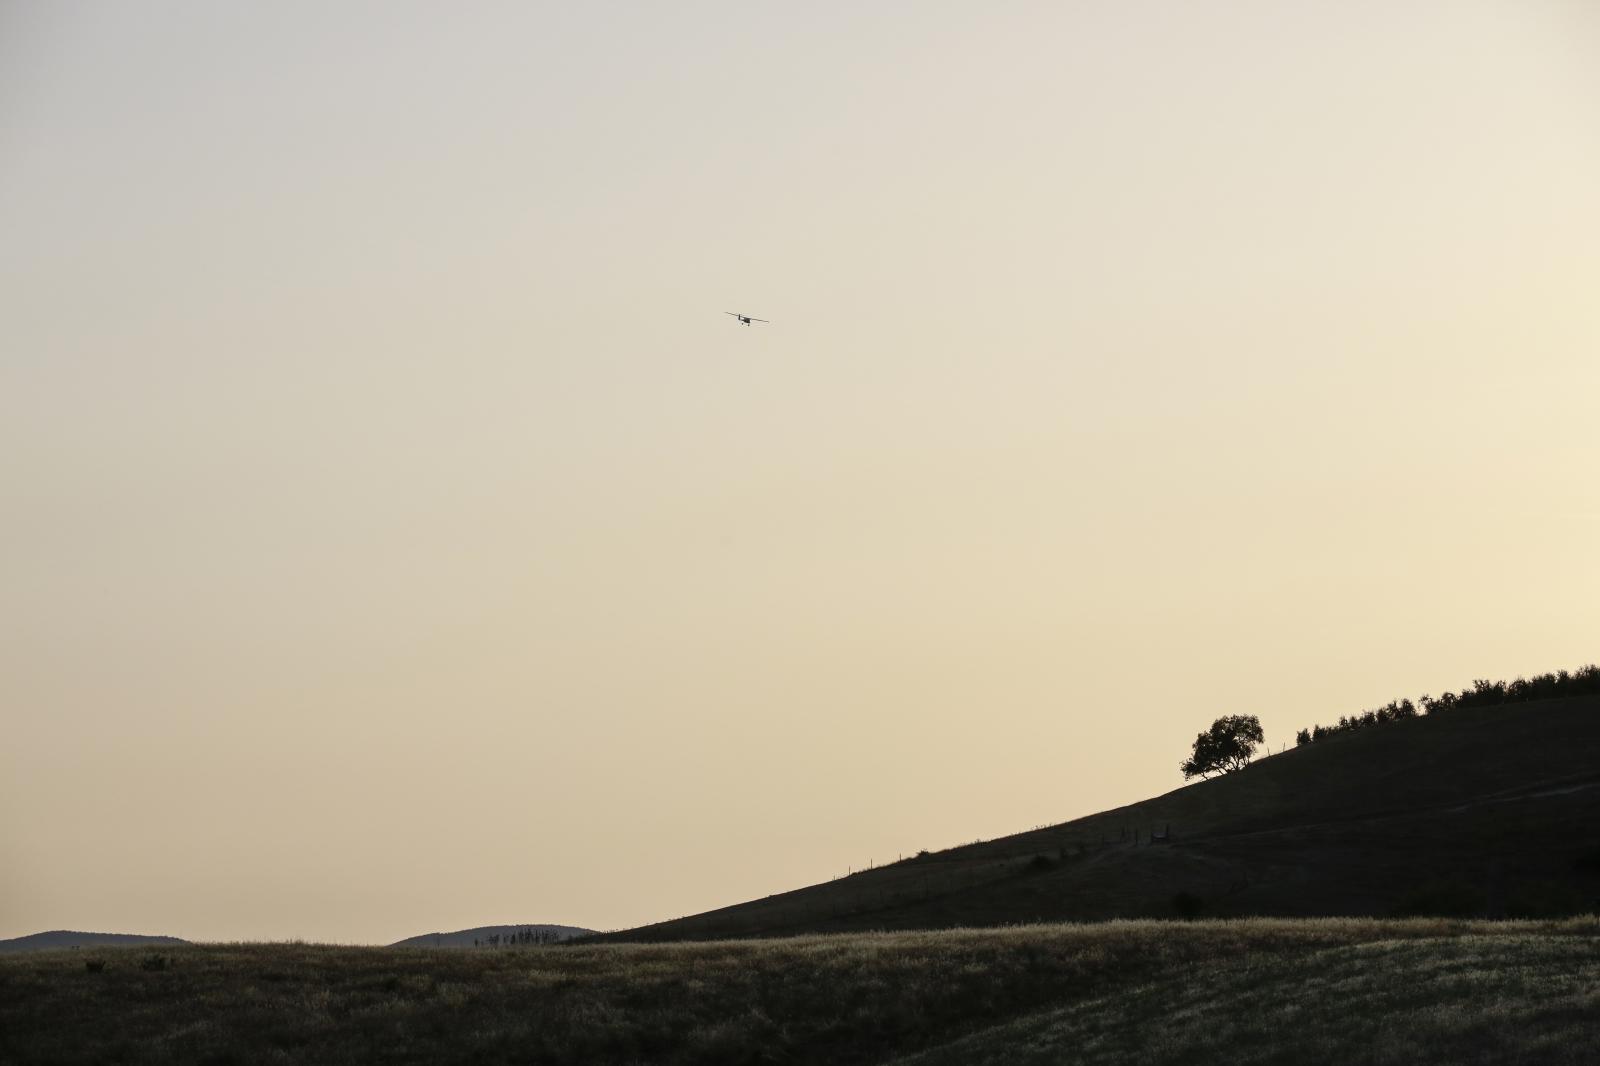 Flying over the hills | Buy this image